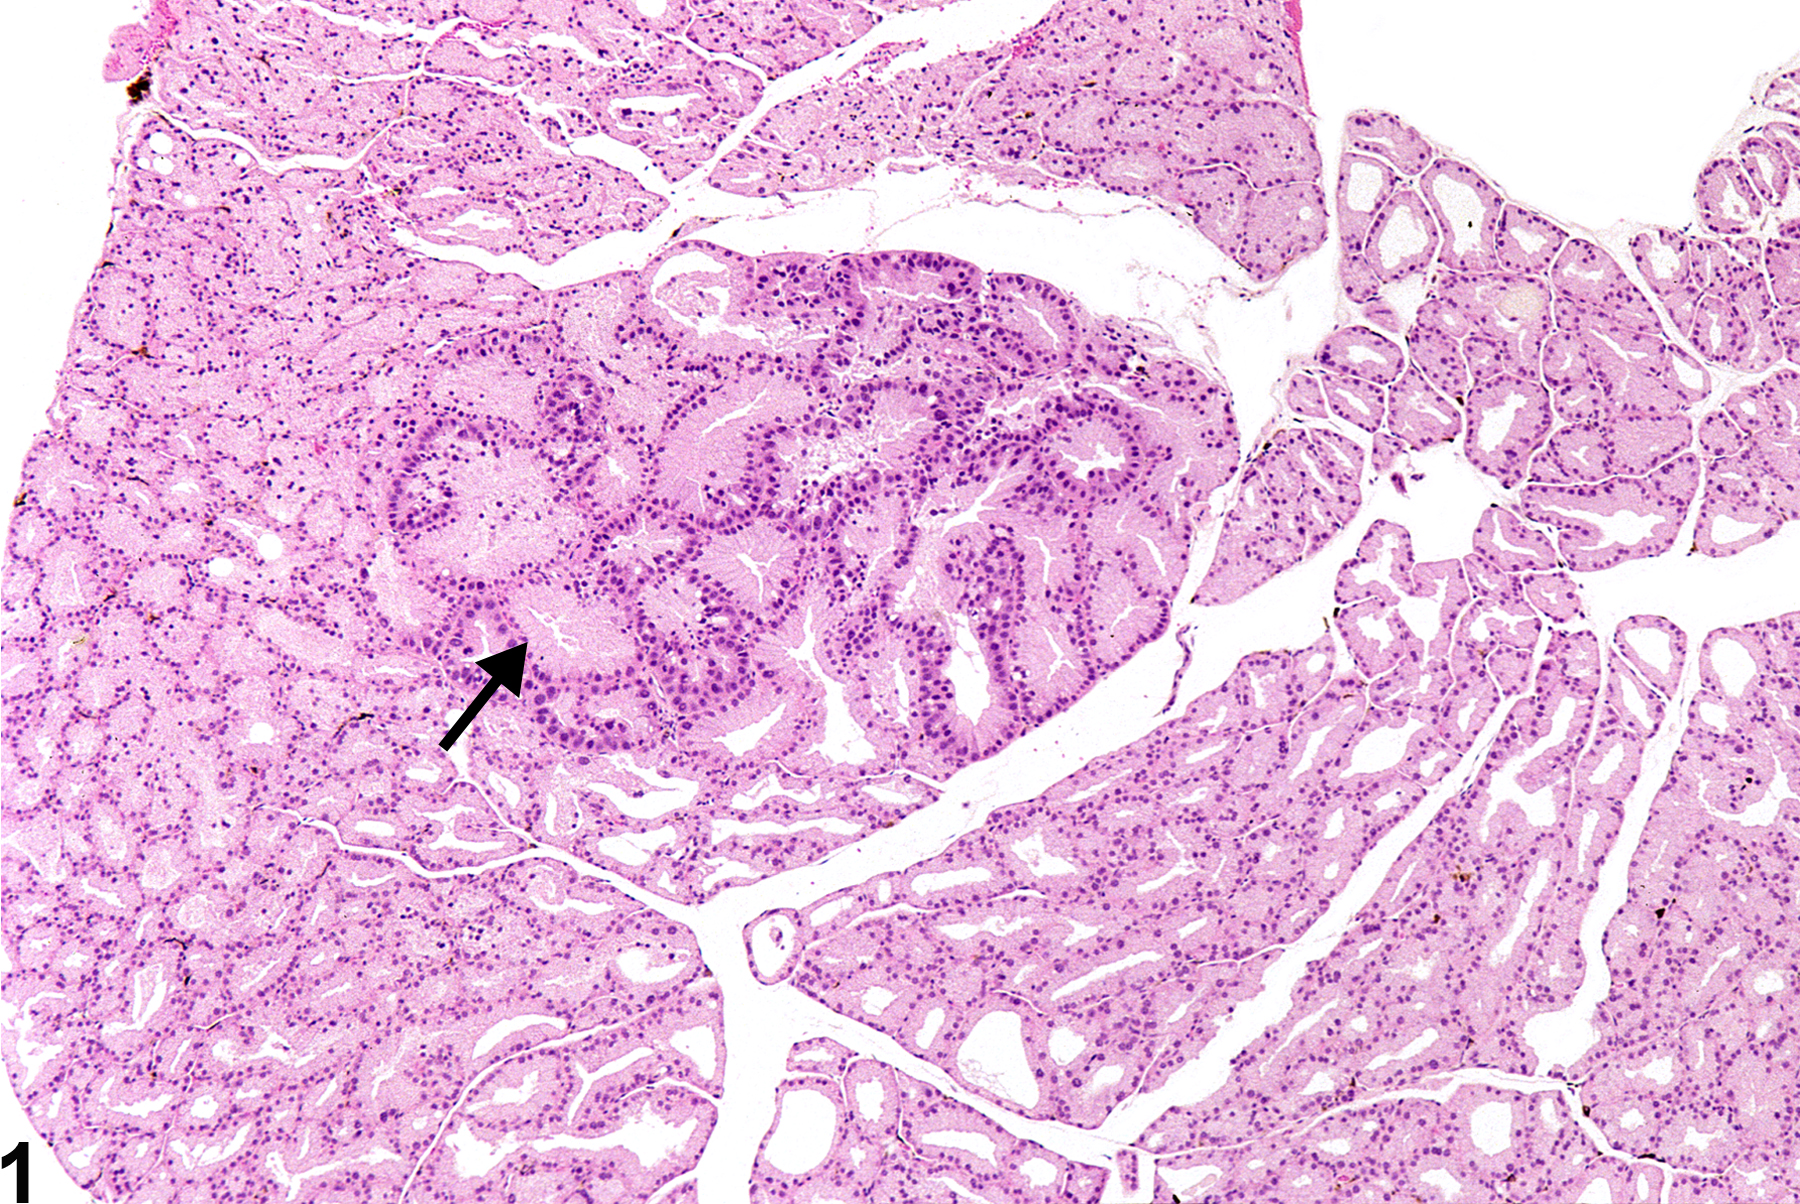 Image of hyperplasia in the Harderian gland from a male B6C3F1 mouse in a chronic study